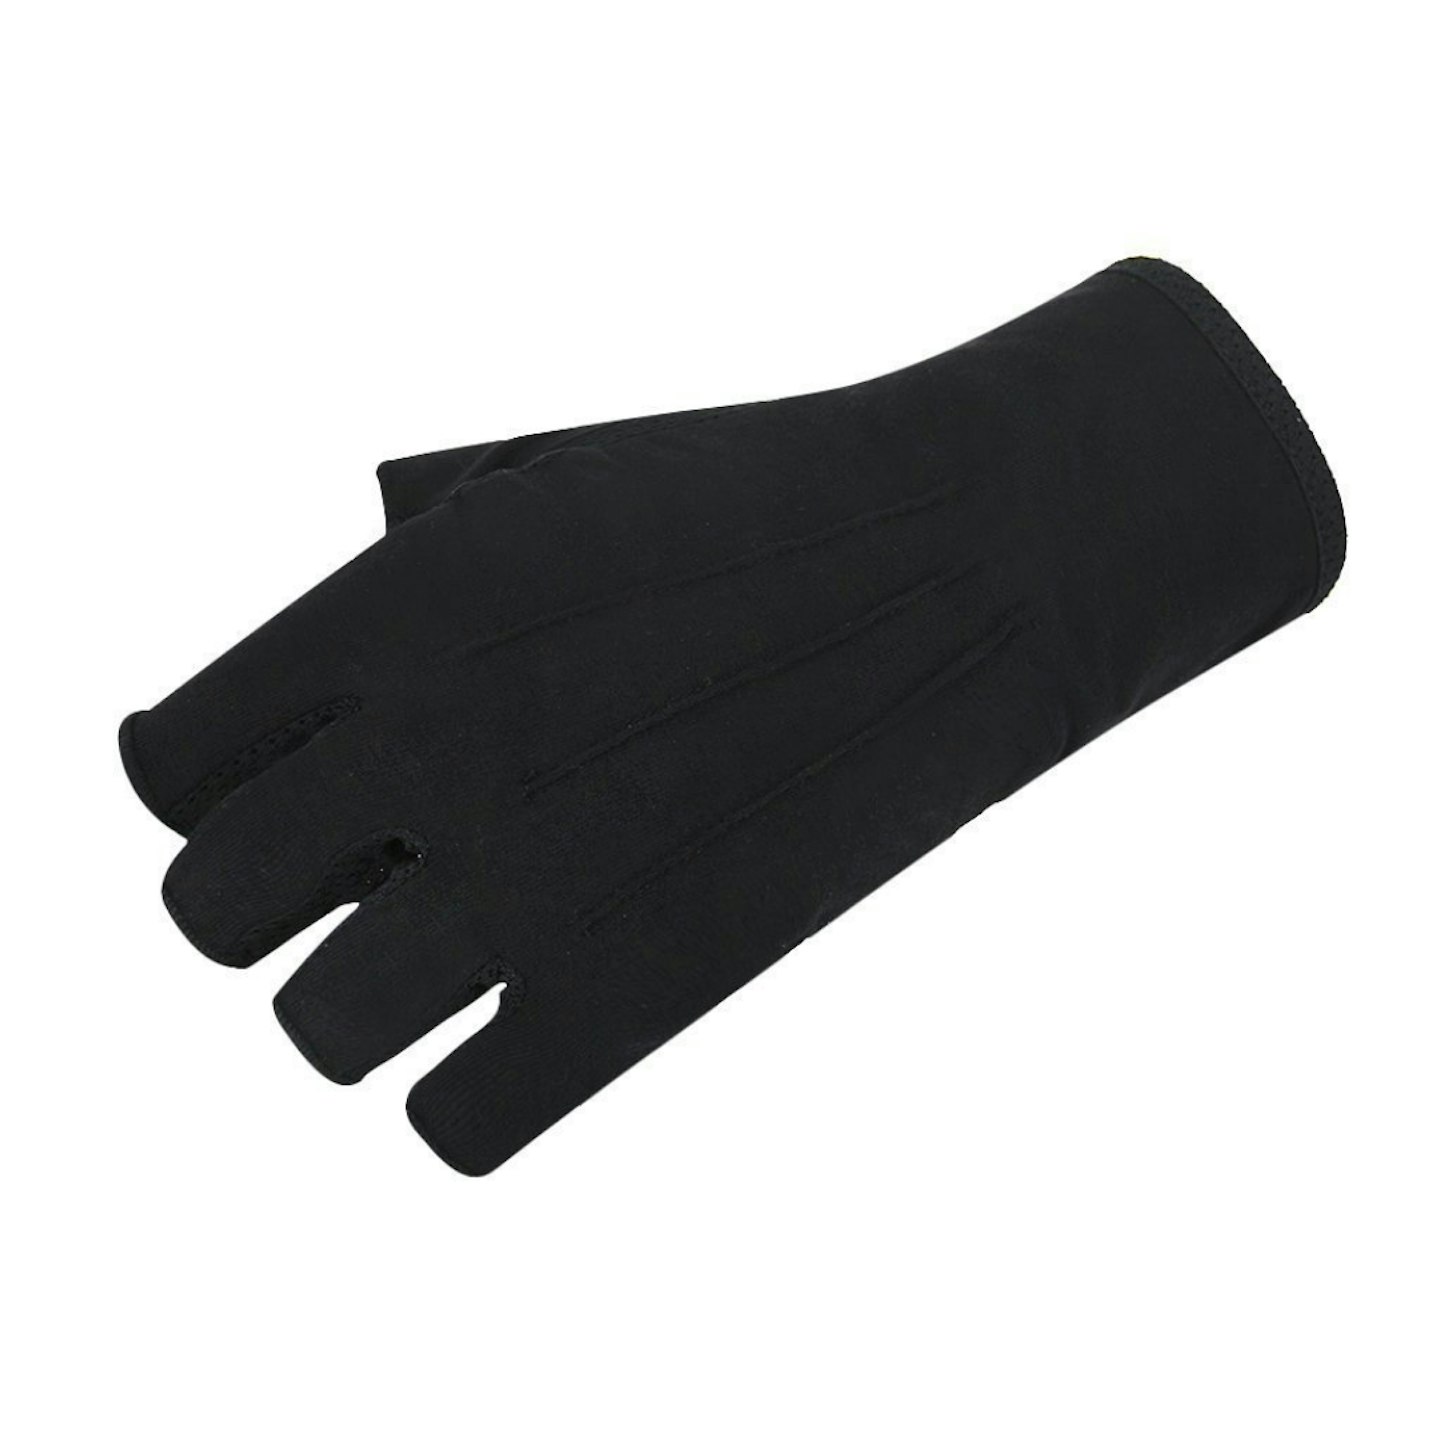 BXT non-slop fingerless driving gloves for track days